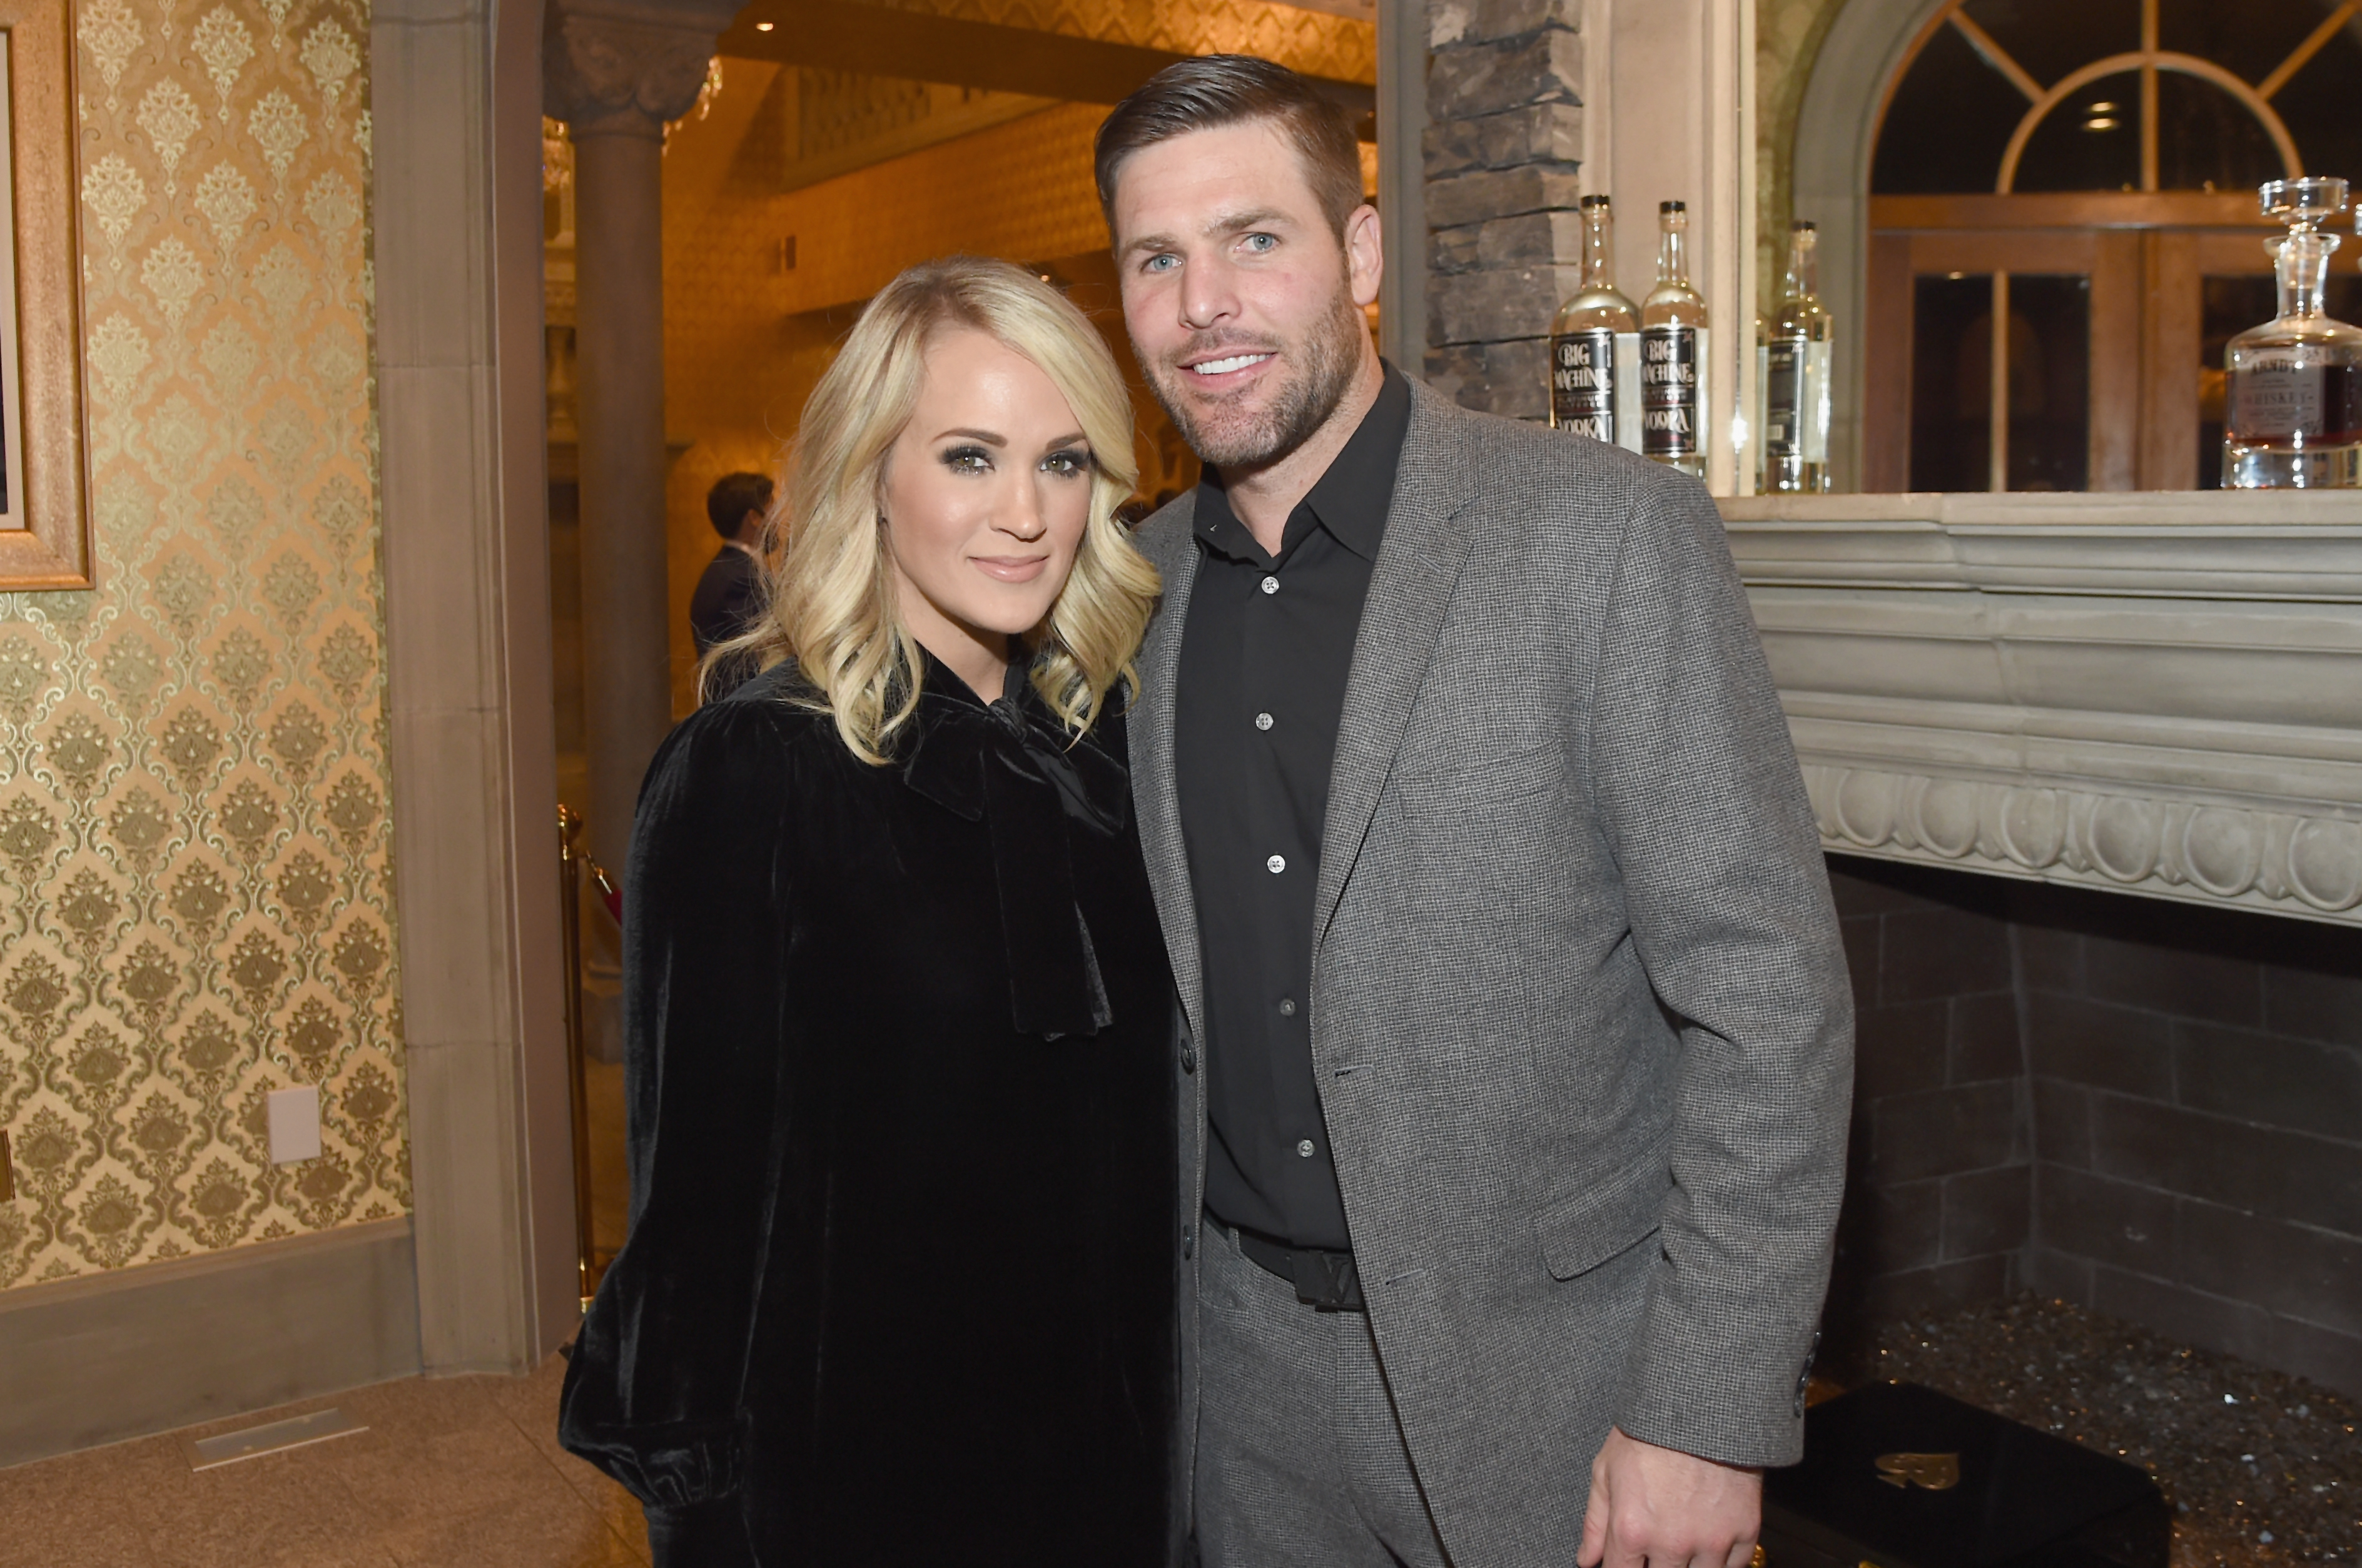 Carrie Underwood and Mike Fisher at the Nashville Shines for Haiti benefiting Sean Penn's J/P Haitian relief organization in Brentwood, Tennessee on October 24, 2017 | Source: Getty Images